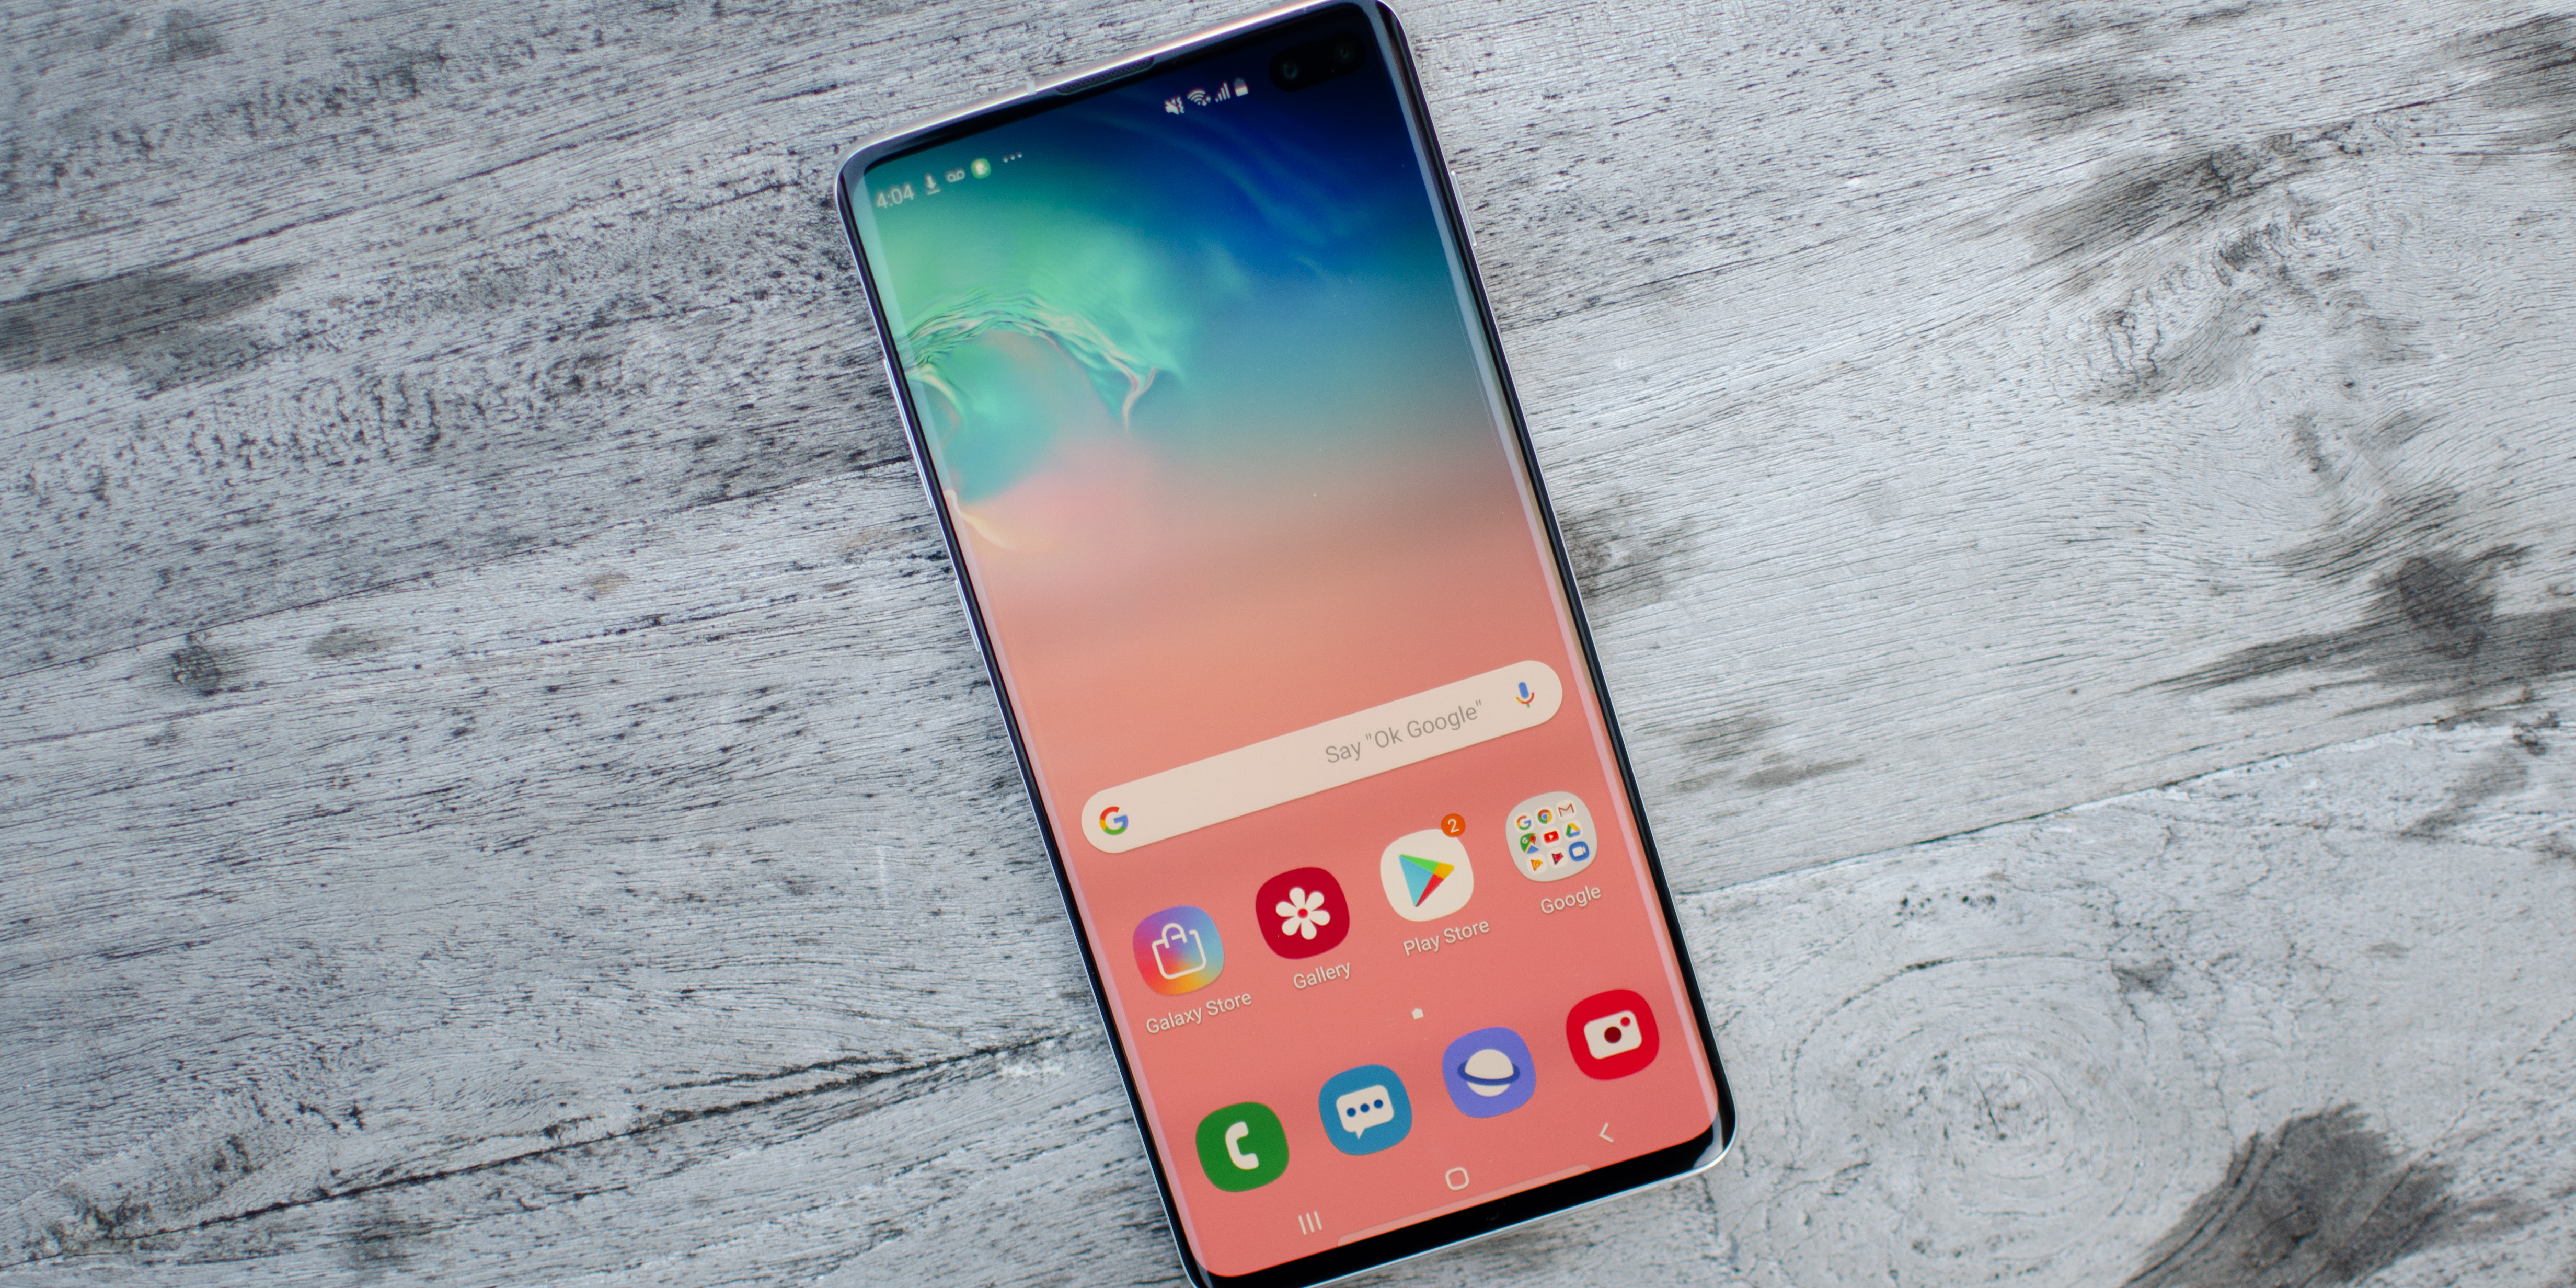 Best Android phone for business: One month with Samsung Galaxy S10